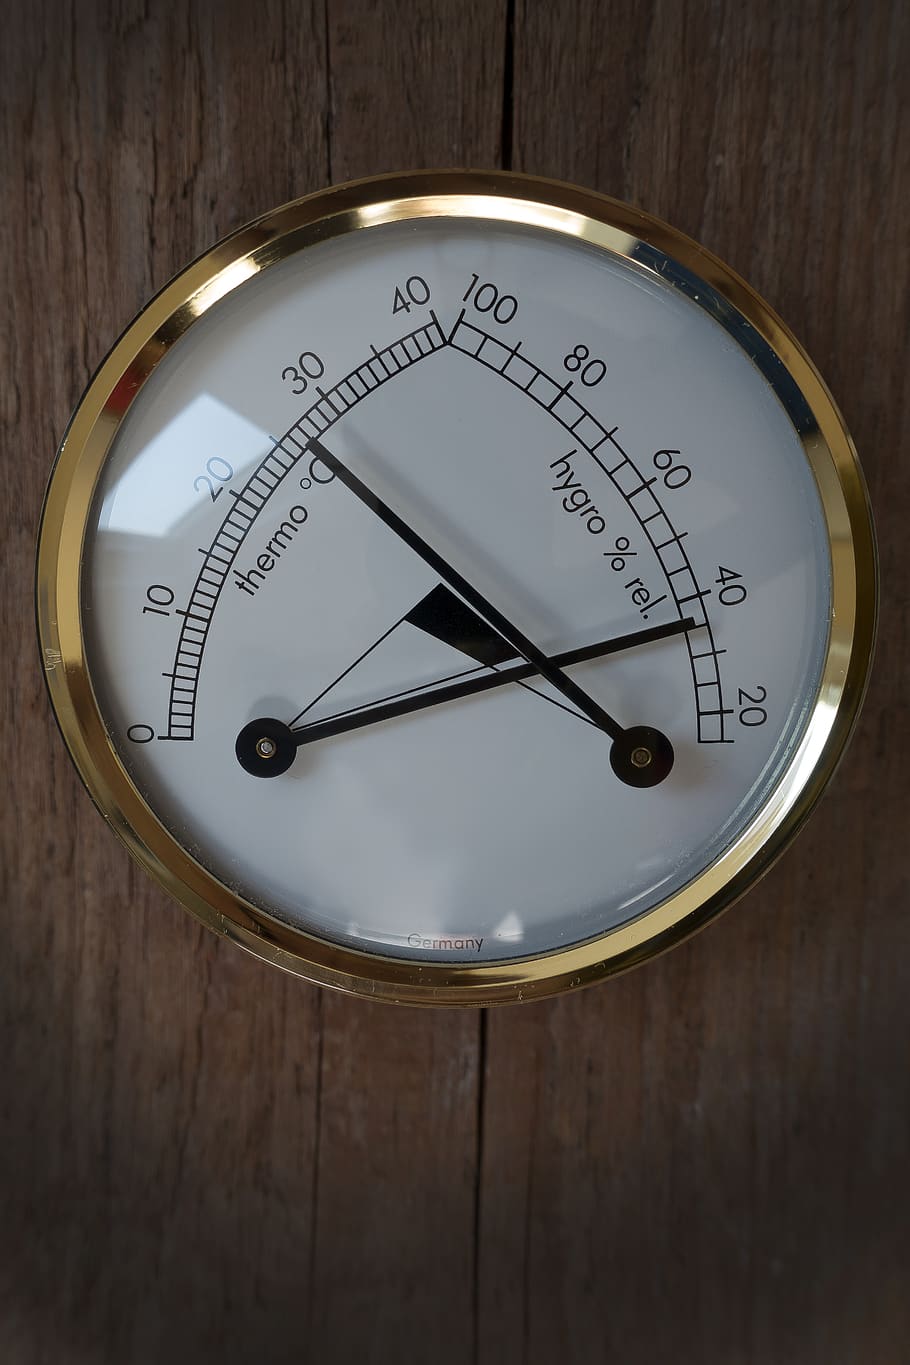 thermometer, hygrometer, instrument, temperature, degrees celsius, pay, ad, temperature display, weather, heat